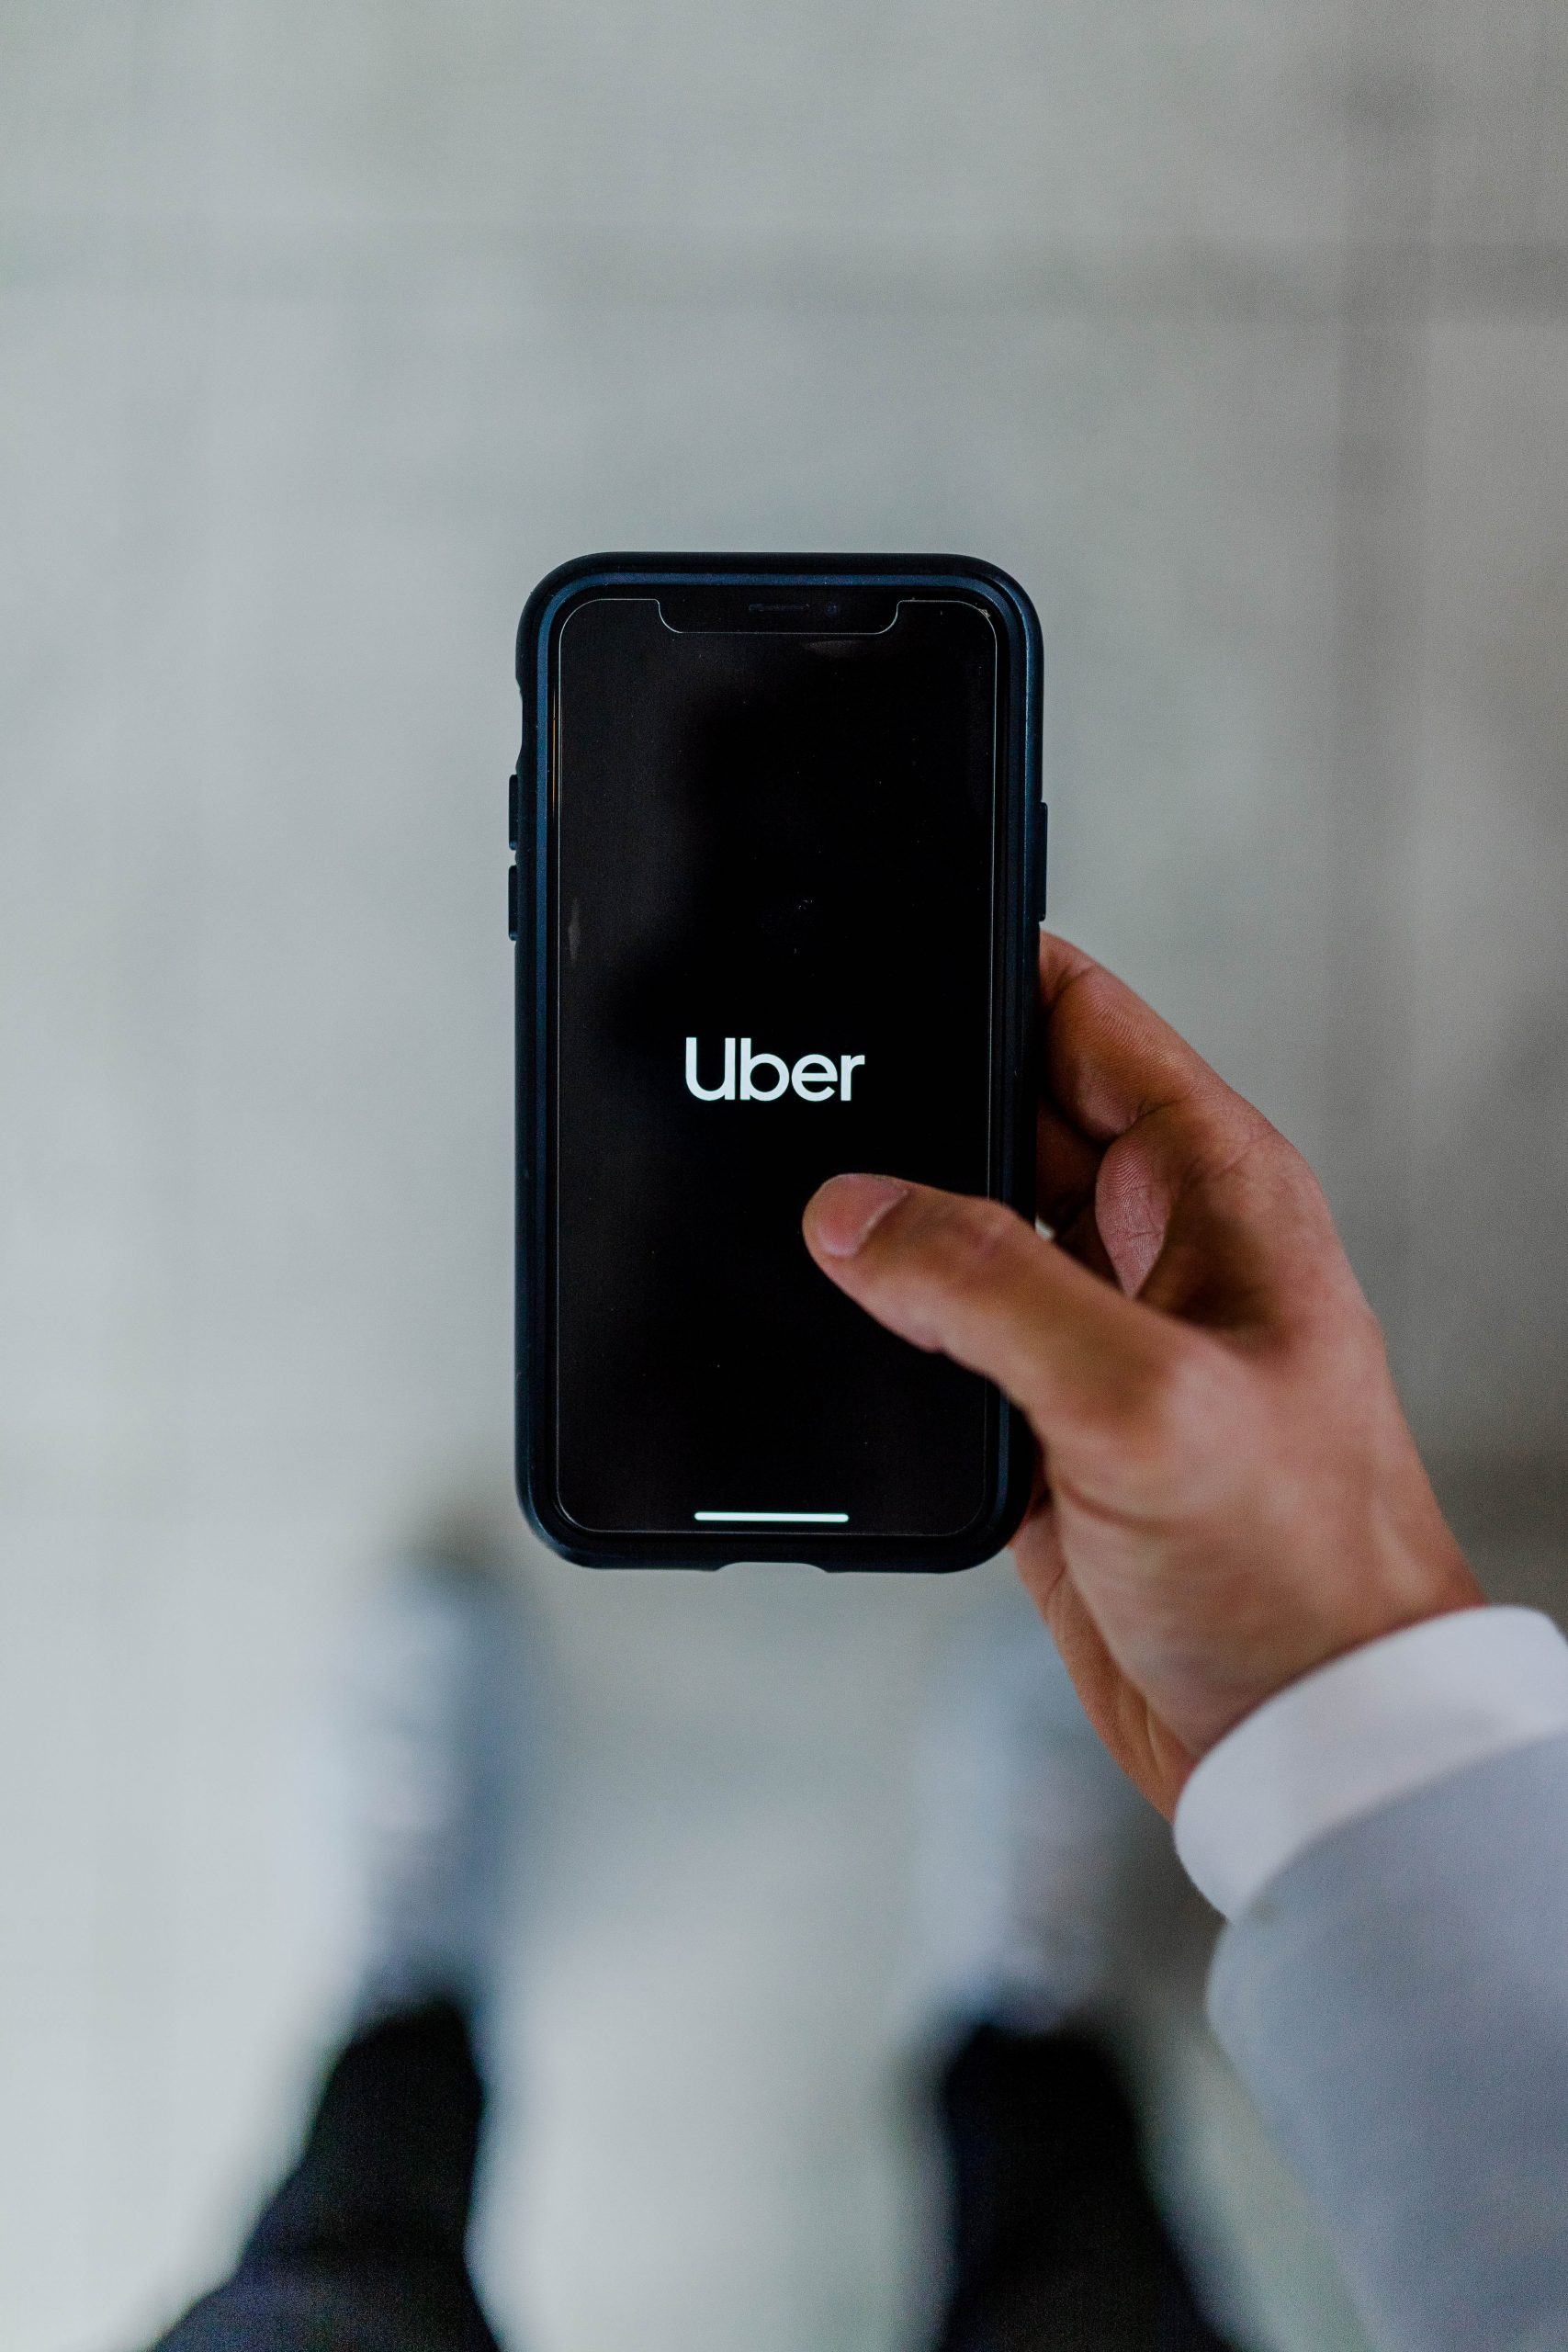 A smartphone screen shows the Uber logo 